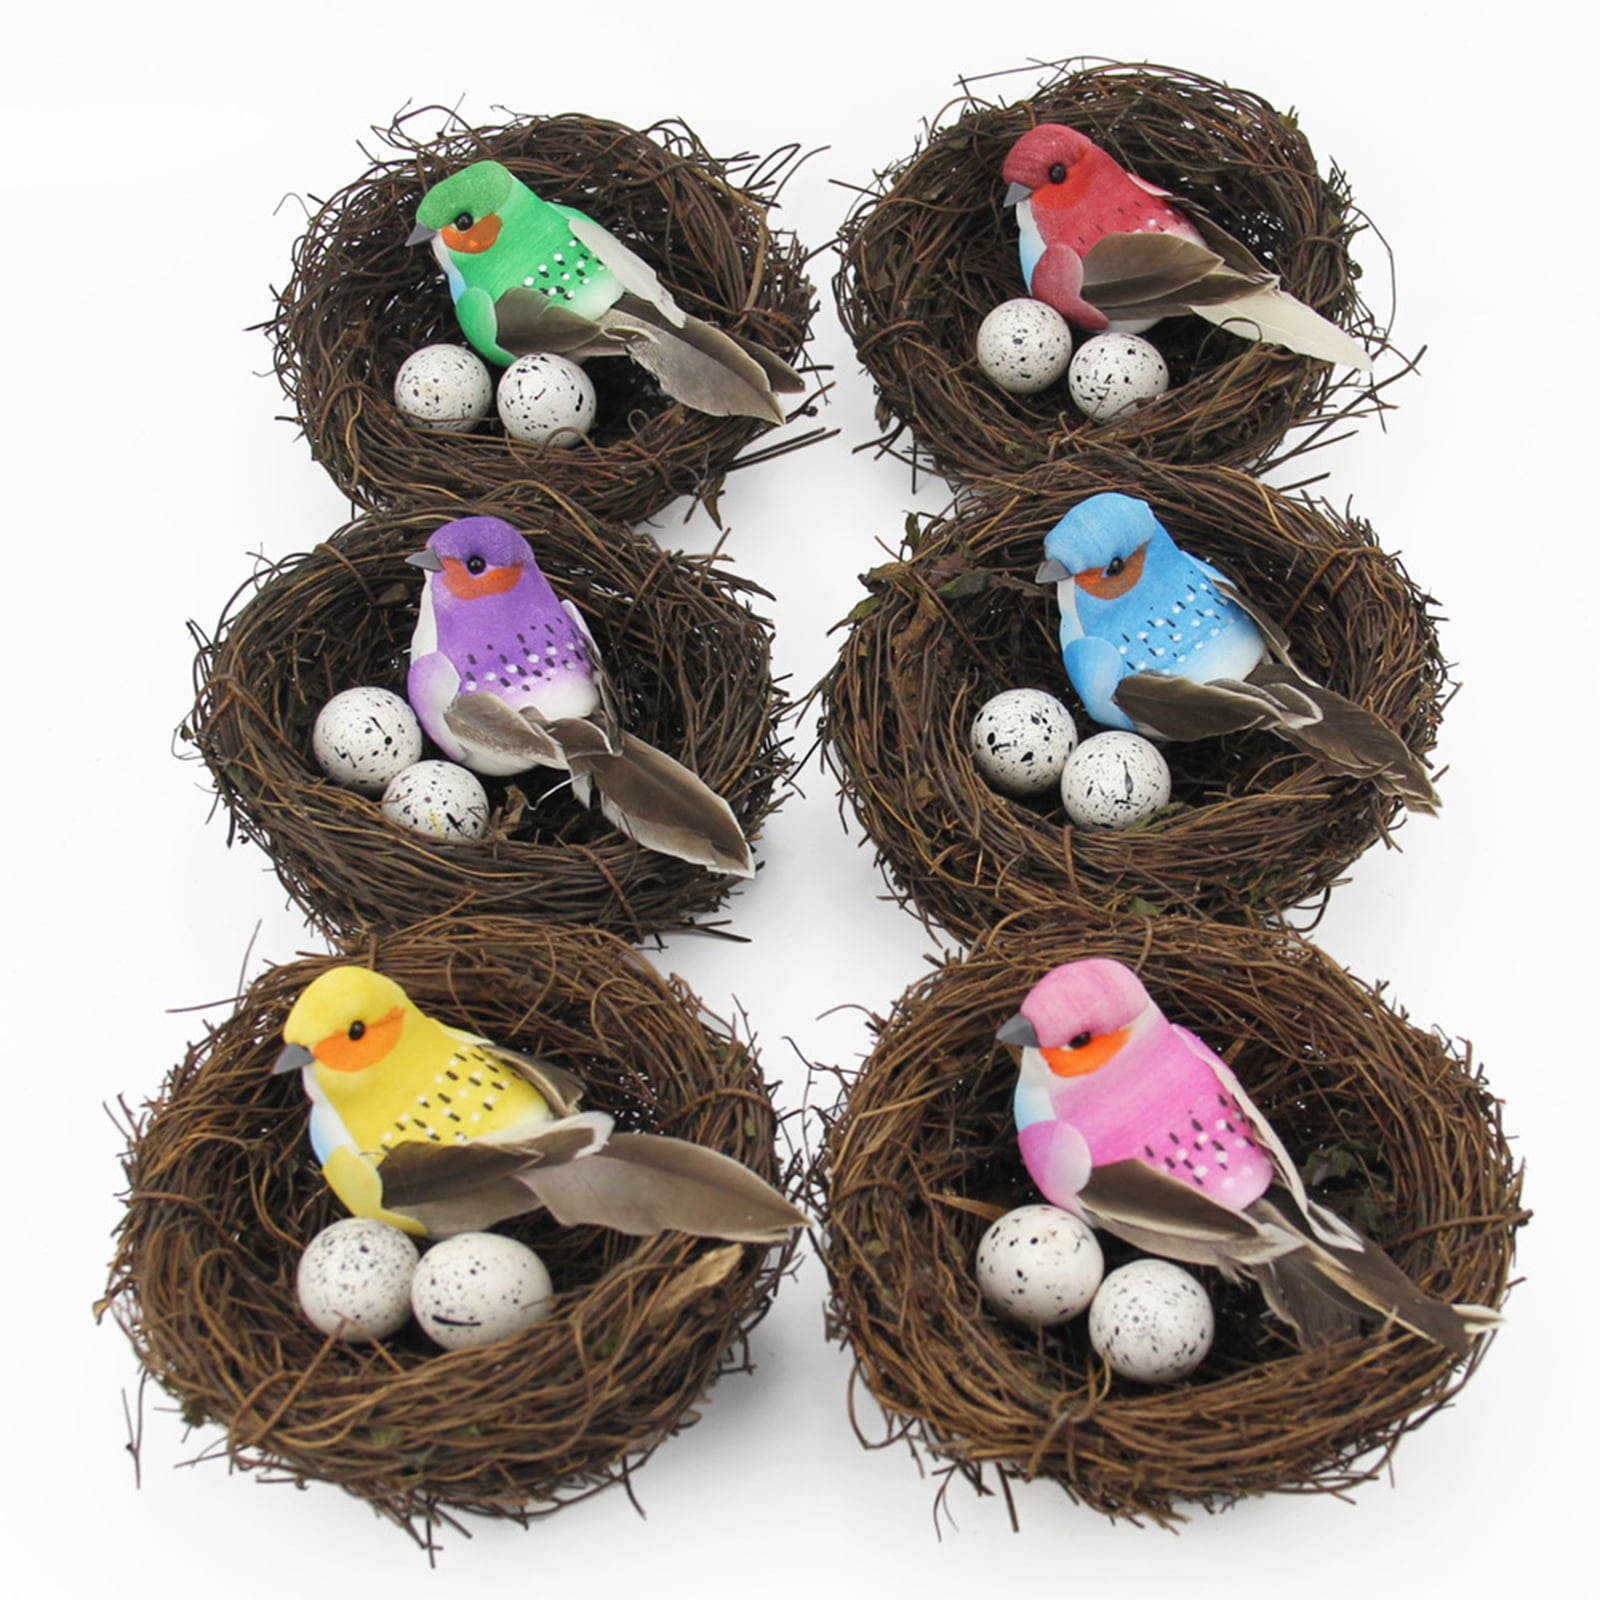 Novelty Resin Eggs Natural Plant Made Bird Nest Decorations Decorative Ornaments 